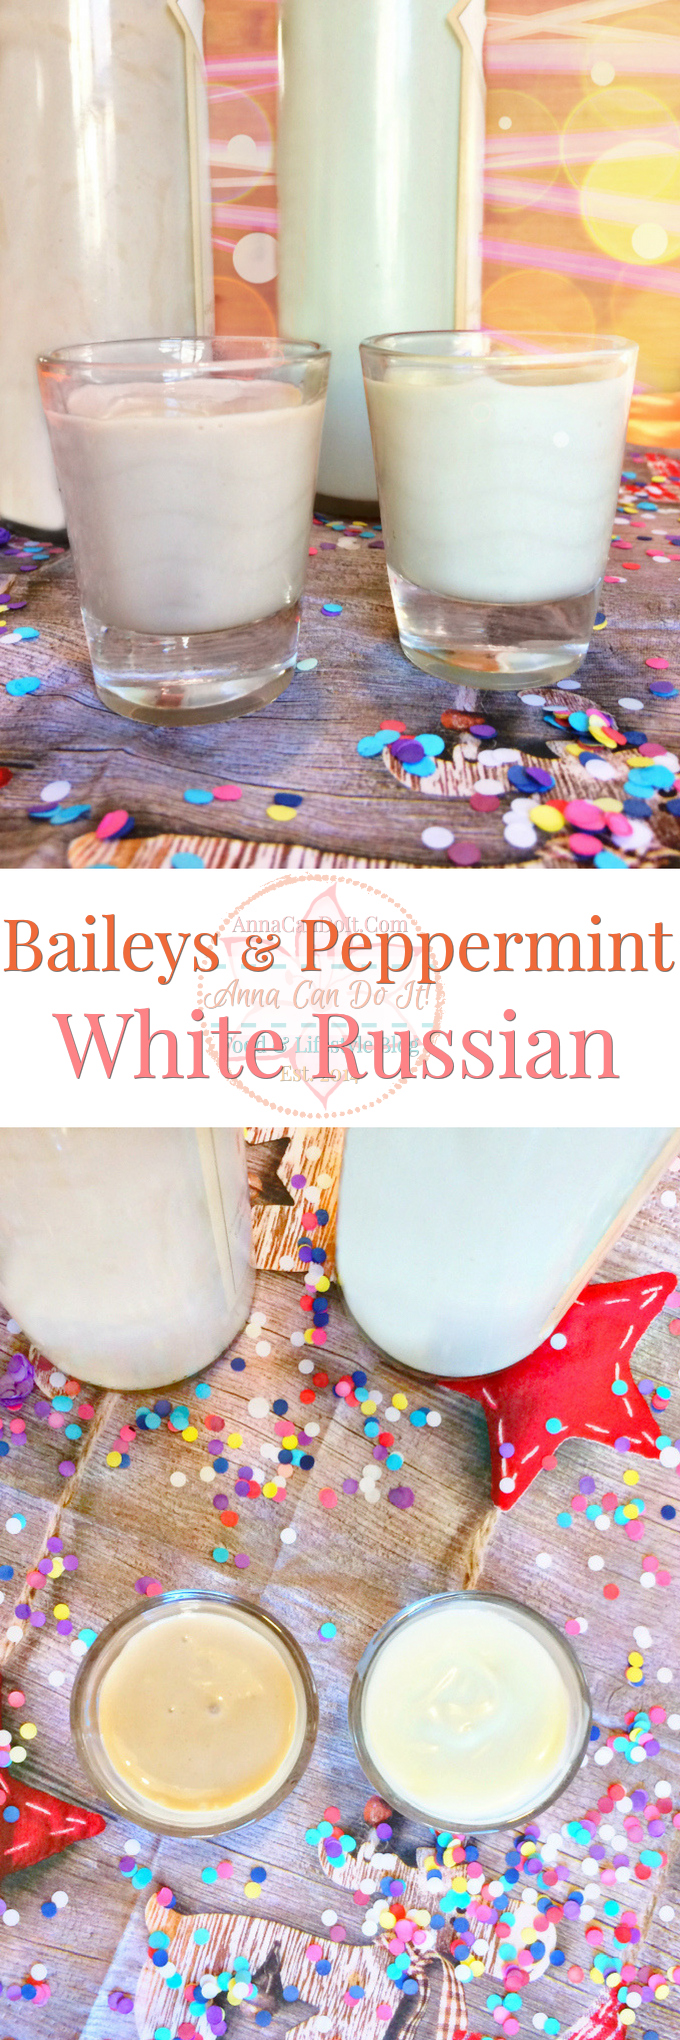 Bailey's & Peppermint White Russian - Anna Can Do It! - Bailey's & Peppermint White Russian are two quick and delicious drinks you can mix and serve to your guests in minutes! Both of these beverages are sweet and tasty, perfect to New Year's Eve or Christmas or a girl's night out!